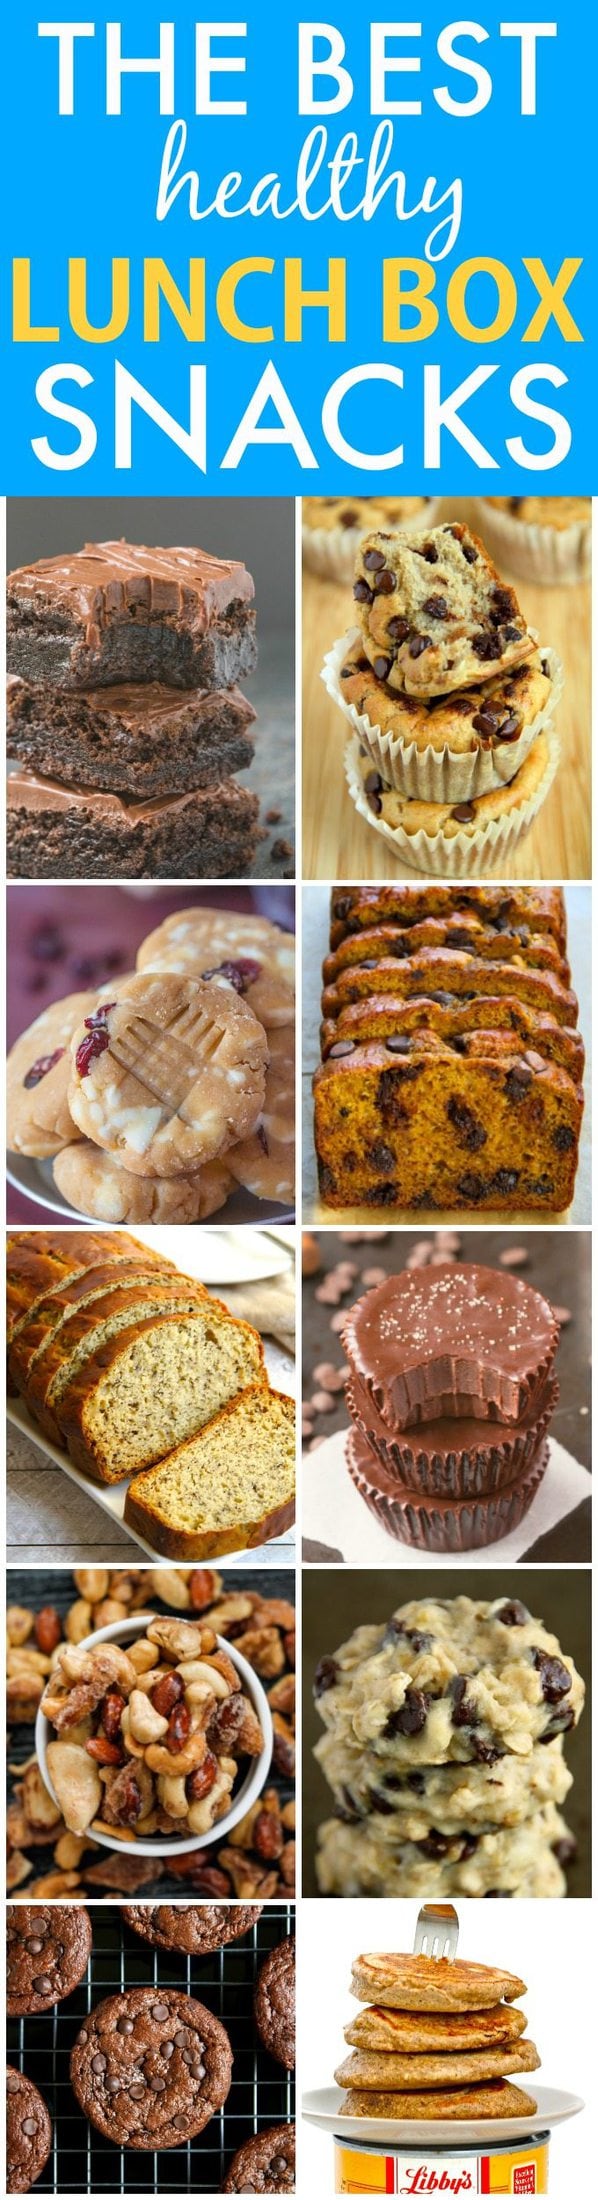 The Ultimate HEALTHY Snacks PERFECT for lunchboxes, back to school, food prep and freezer friendly- Muffins, bars, cakes and brownies made with NO nasties! {no bake, vegan, gluten free, paleo, sugar free recipe options}- thebigmansworld.com